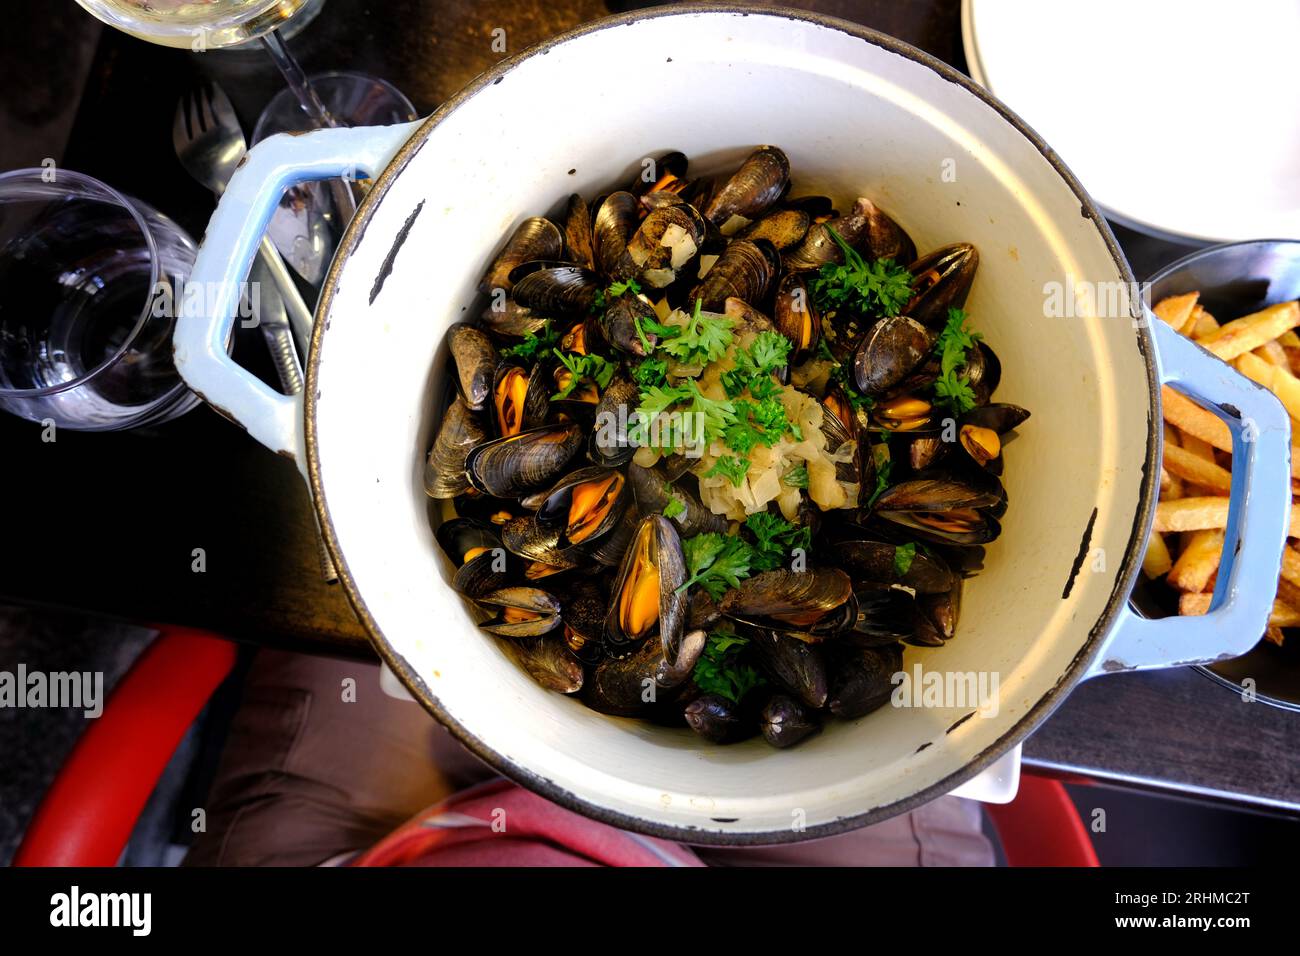 Bowl of Moules in a French restaurant Stock Photo